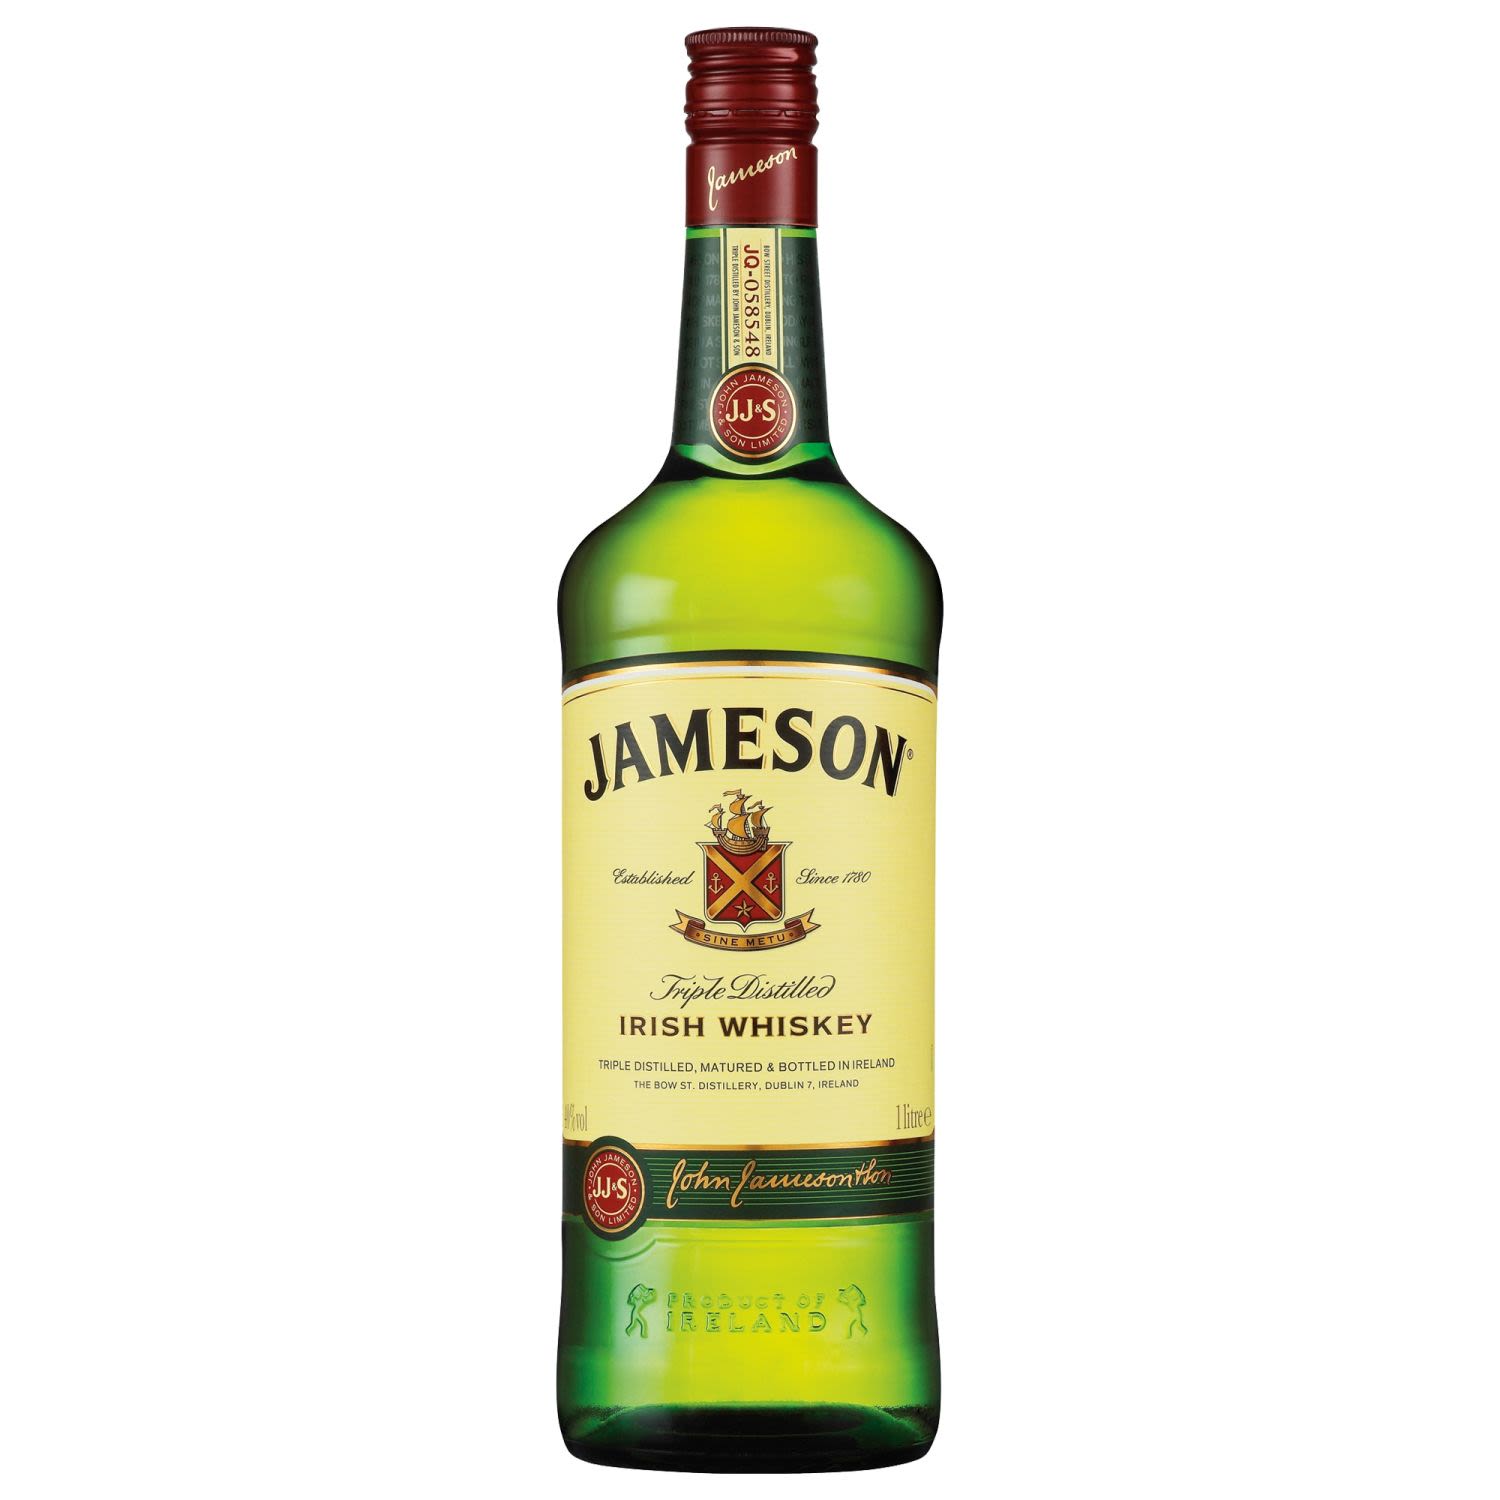 Jameson is a single distillery Irish whiskey based in Dublin. Produced using unmalted grain, Jameson's has a light and delicate flavour and a wonderfully smooth texture.<br /> <br />Alcohol Volume: 40.00%<br /><br />Pack Format: Bottle<br /><br />Standard Drinks: 32</br /><br />Pack Type: Bottle<br /><br />Country of Origin: Ireland<br />